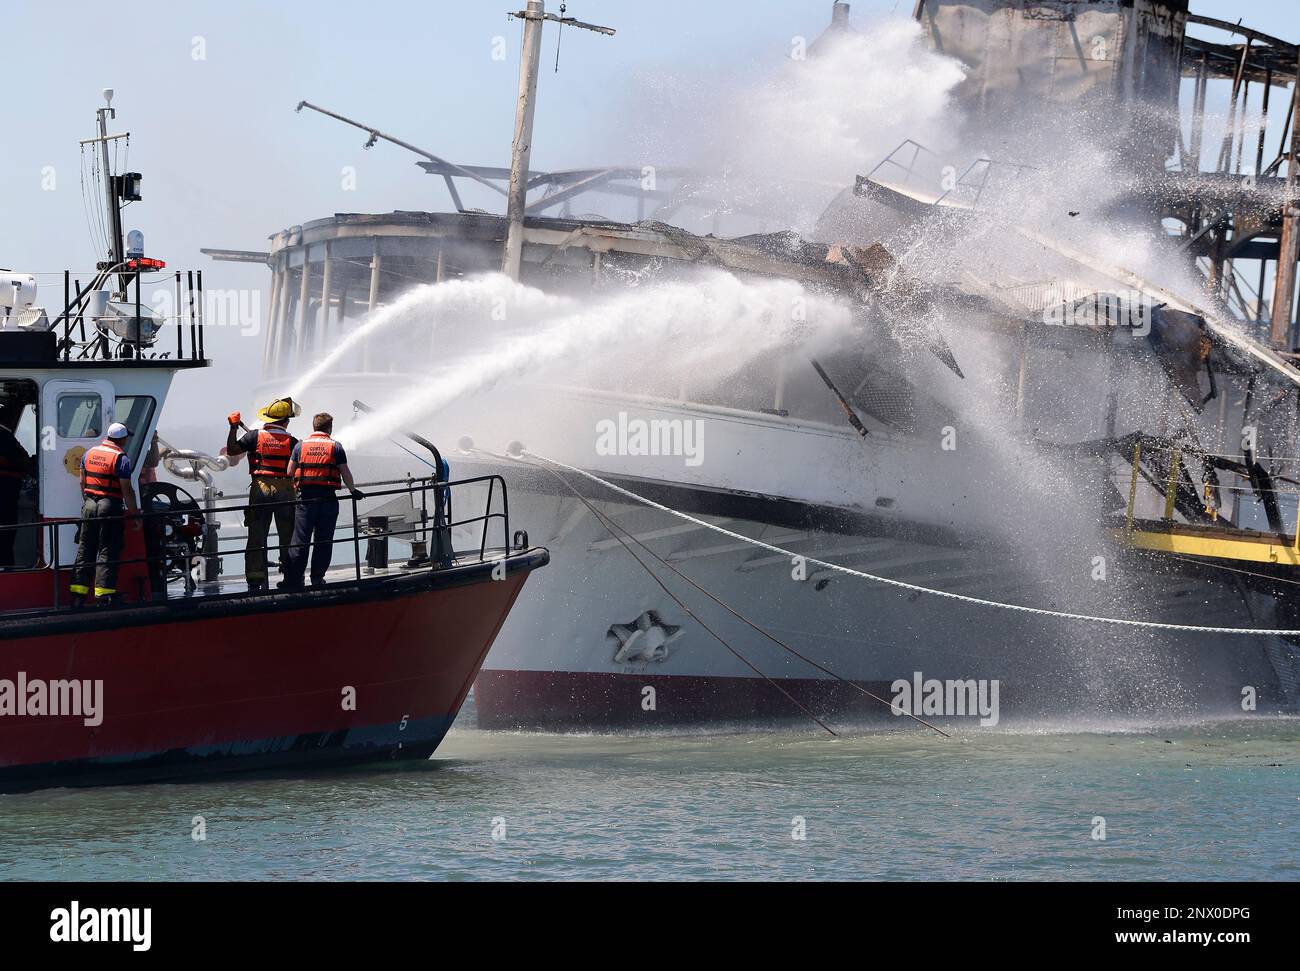 Members of the Detroit Fire Department Marine Corps spray water on the SS  Ste. Claire that was on fire at a marina in Detroit, on Friday, July, 6,  2018. The blaze on